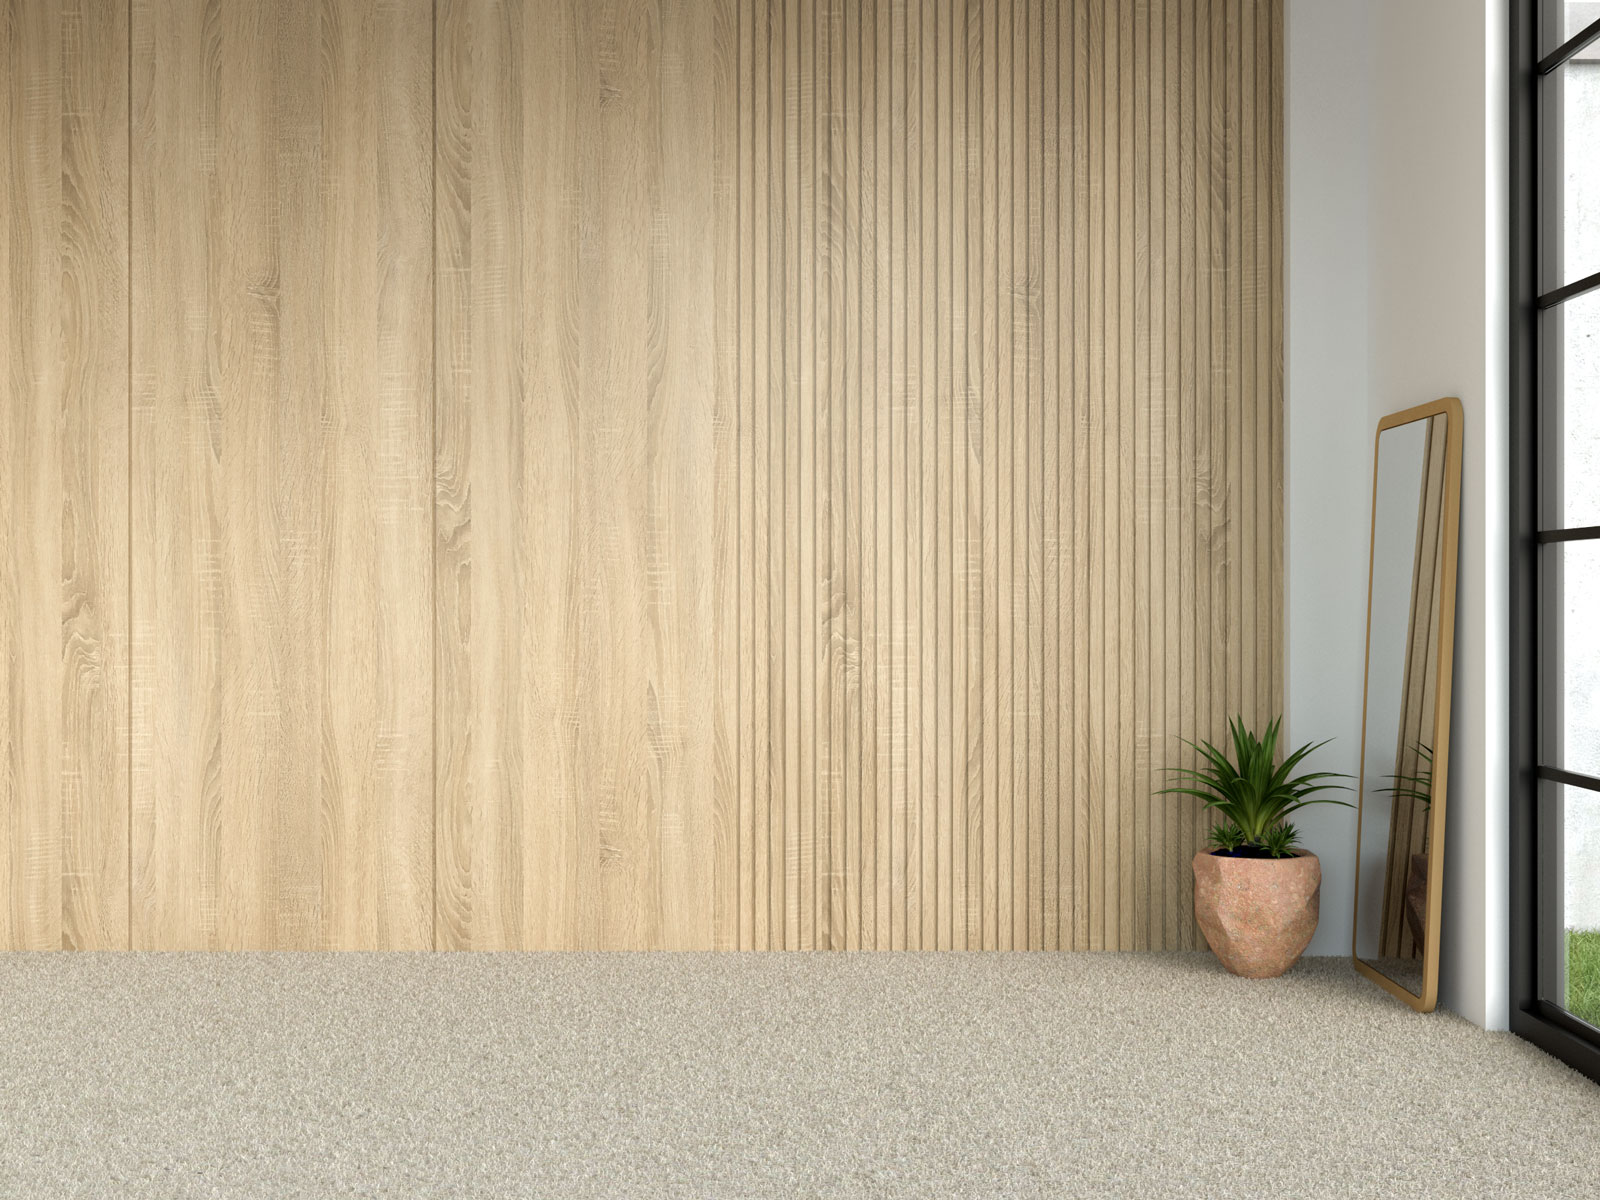 Beige carpet flooring with wood wall